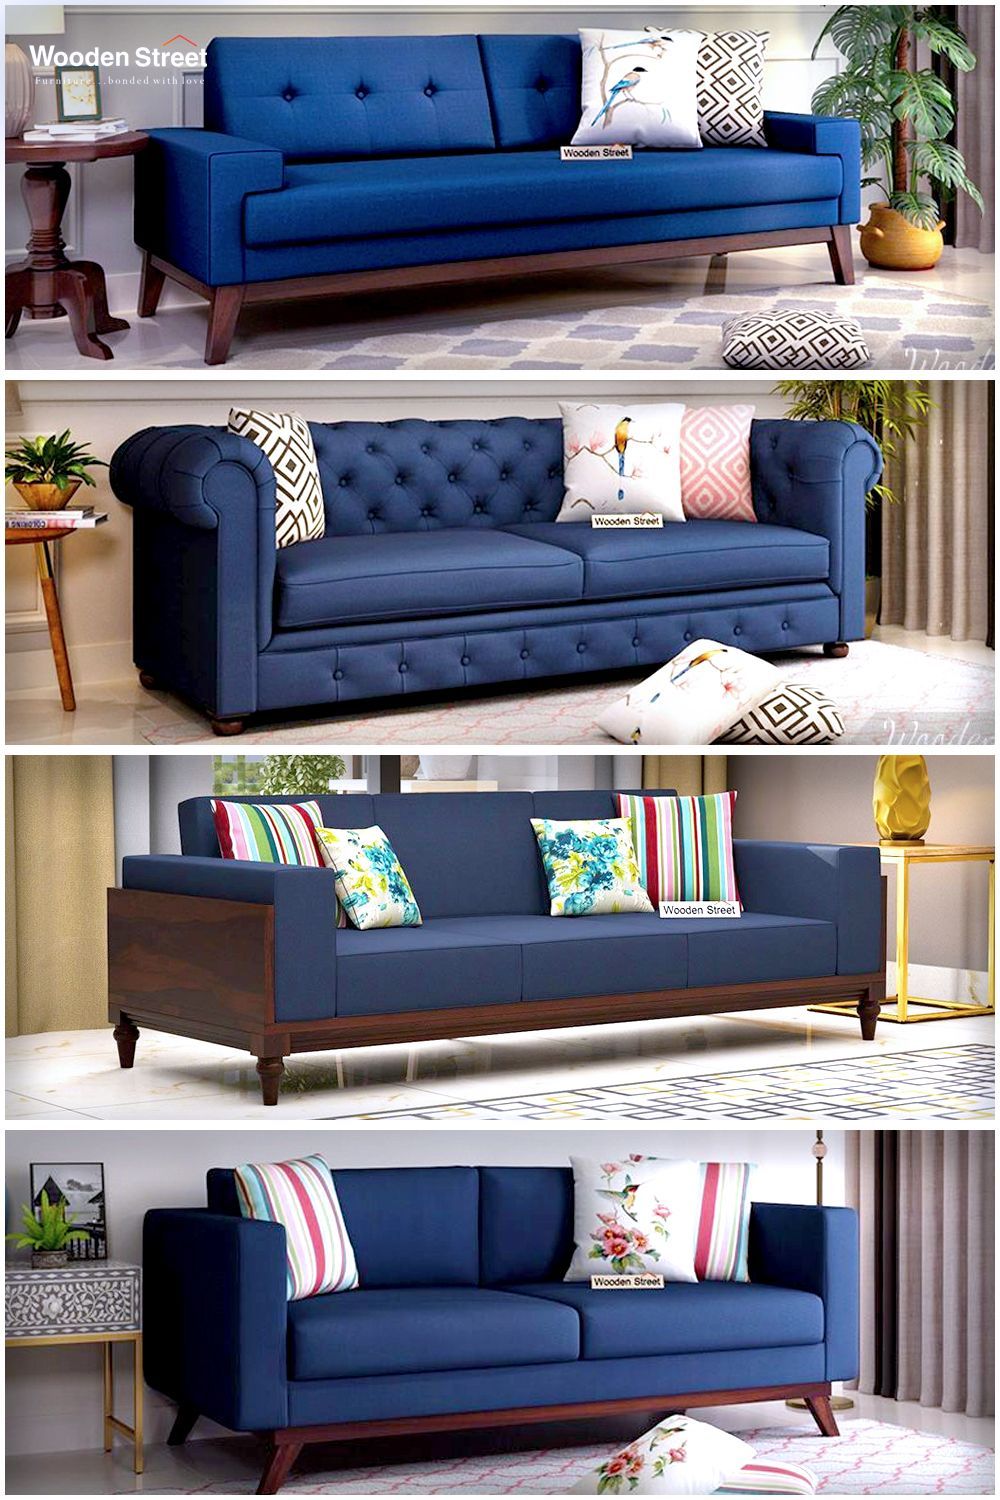 3 Seater Sofa | Wooden Sofa Designs, Sofa Bed Design, Sofa Table Decor Pertaining To Modern 3 Seater Sofas (View 15 of 15)